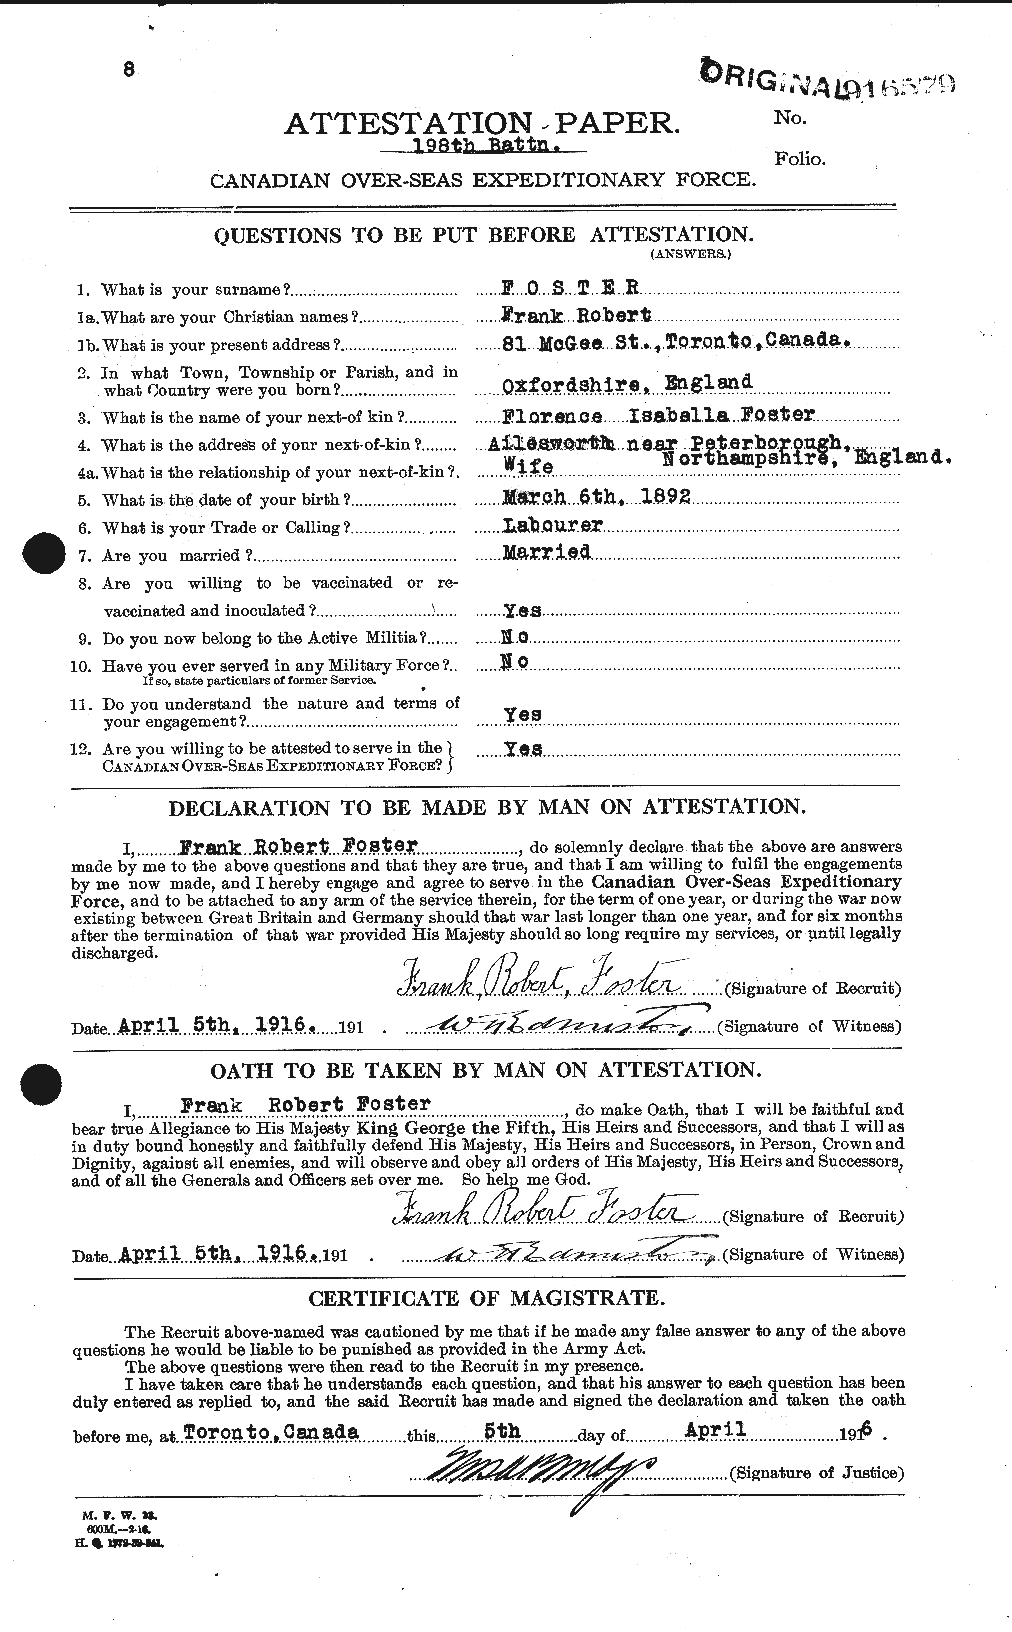 Personnel Records of the First World War - CEF 330628a